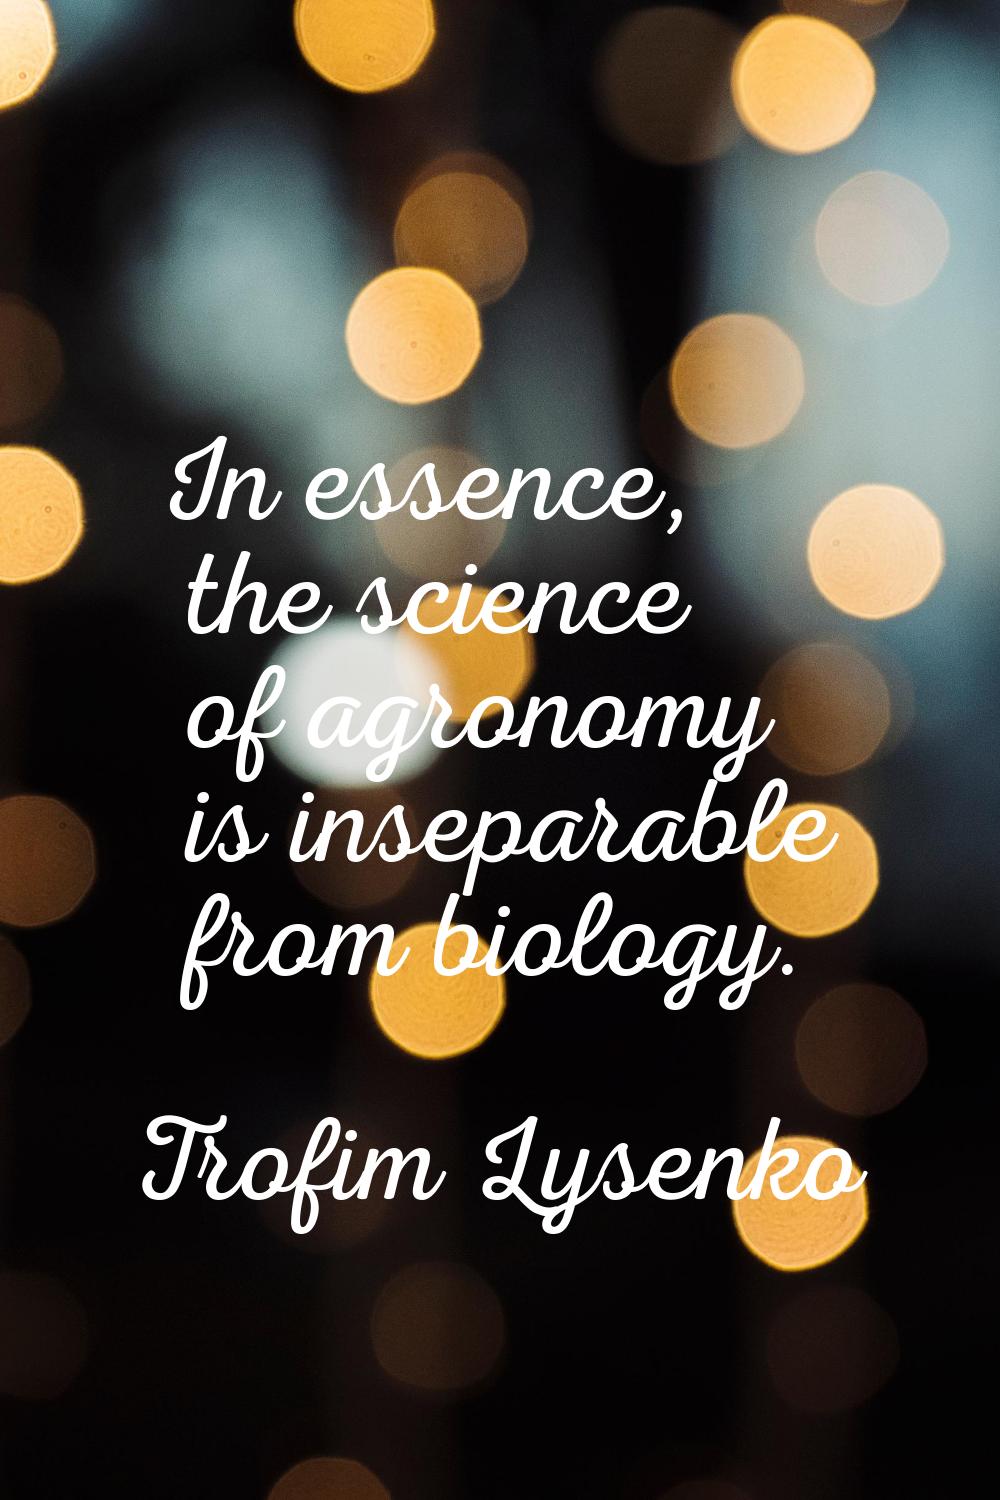 In essence, the science of agronomy is inseparable from biology.